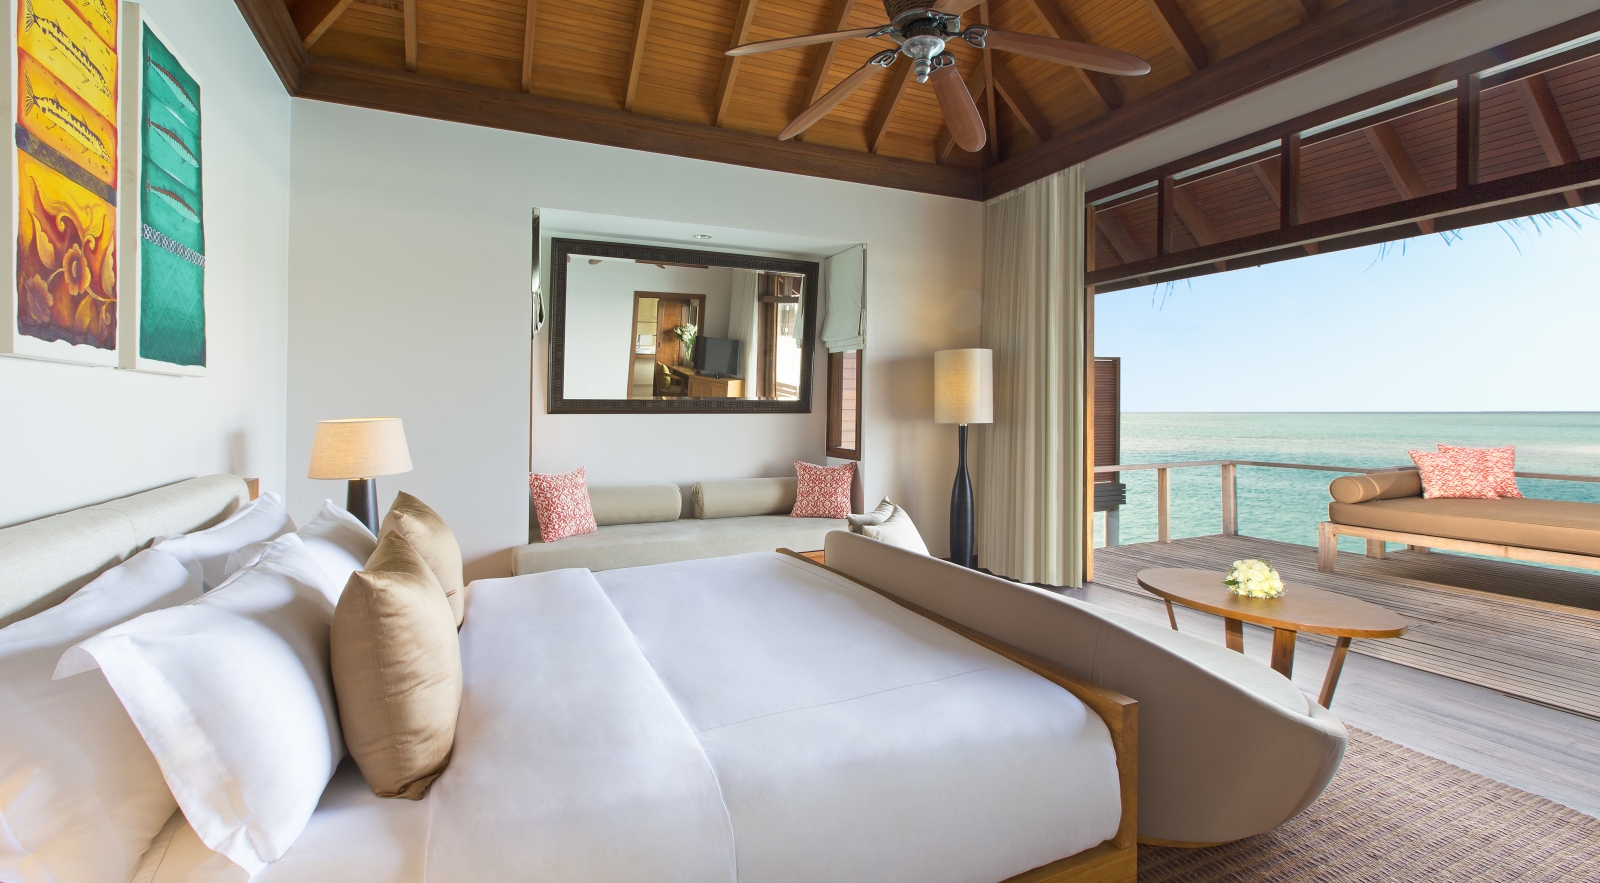 Bedroom of a Superior Overwater Bungalow at luxury resort Anantara Veli in the Maldives